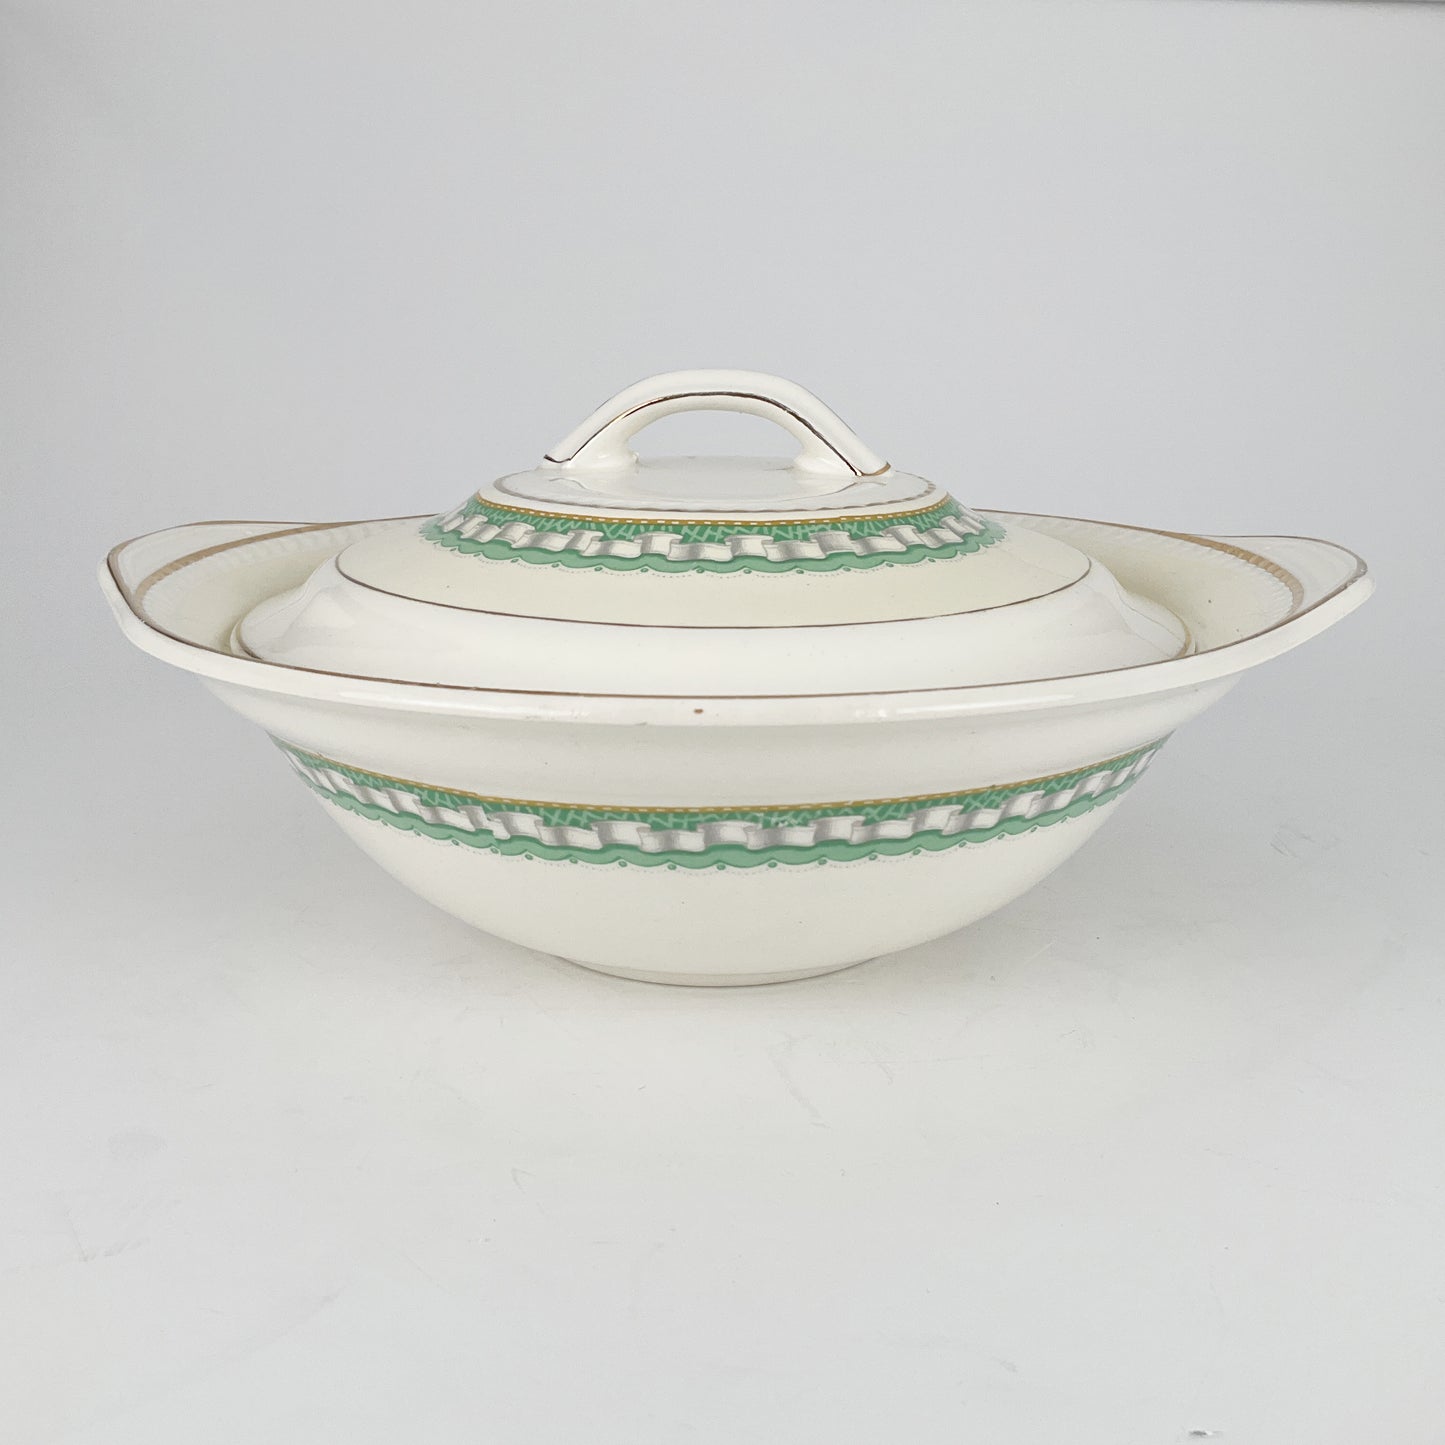 Portland Pottery - Serving Bowl with Lid